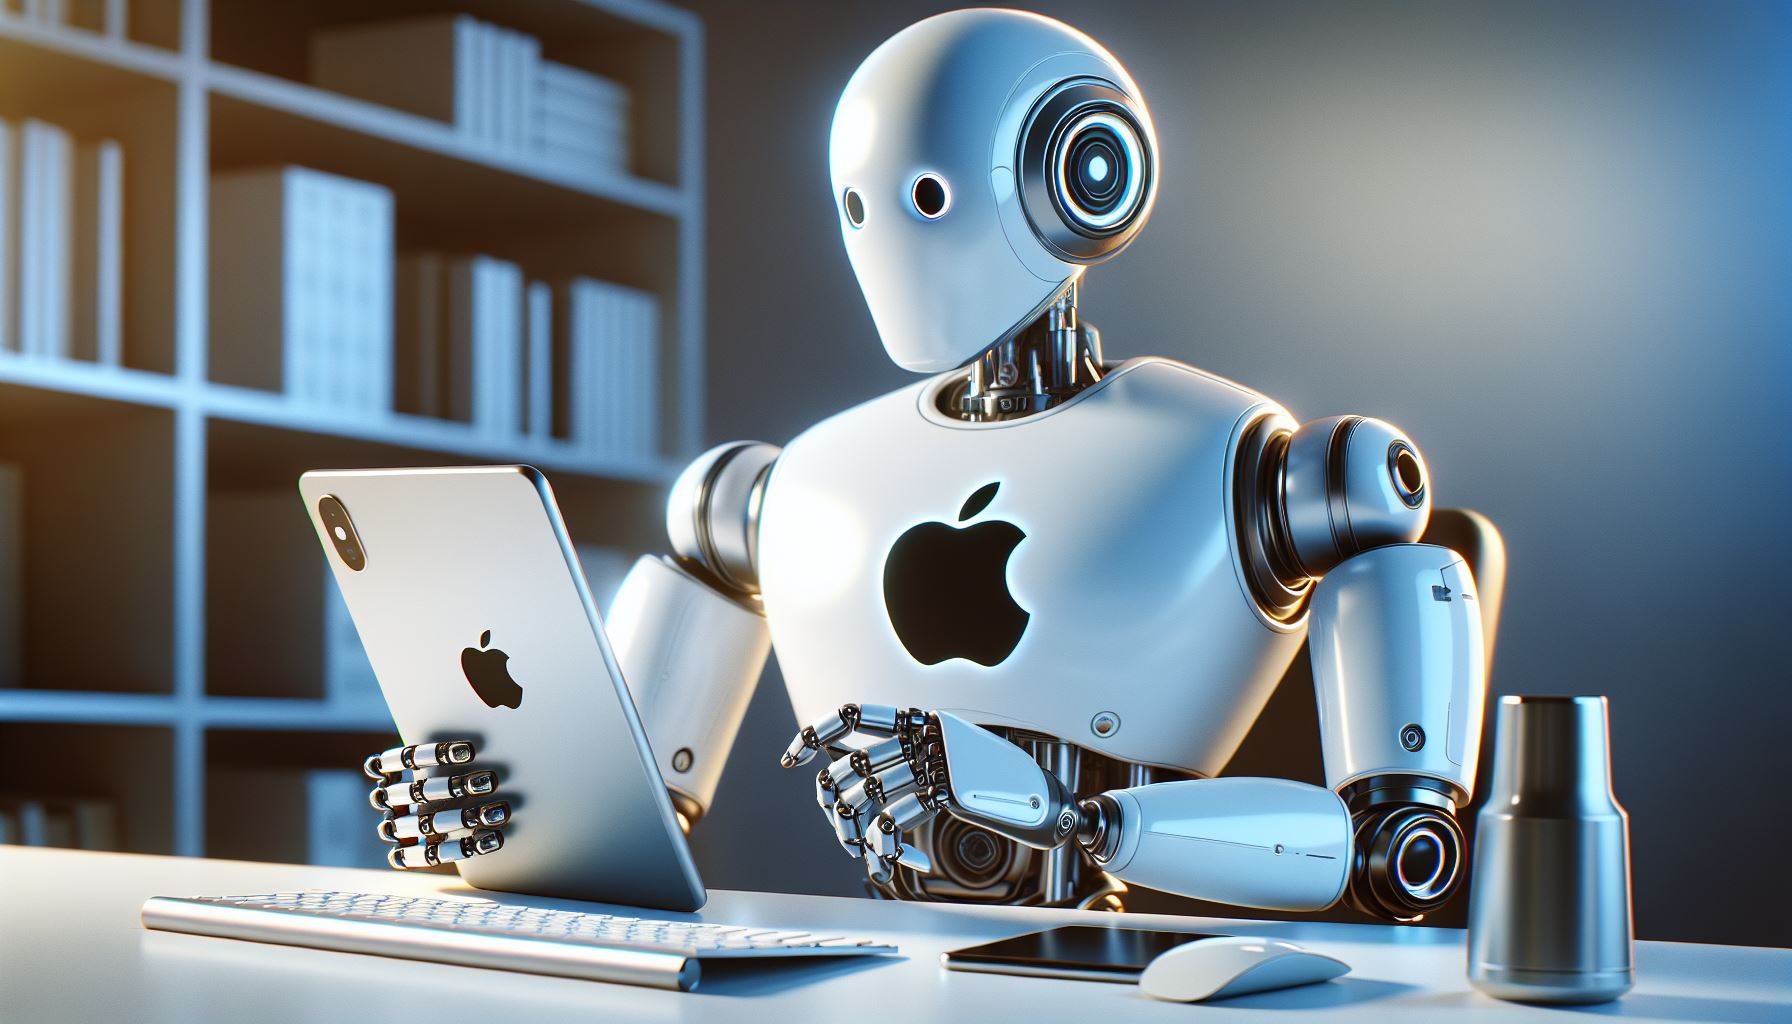 Apple's Next Big Thing Exploring Mobile Robotics and Innovations